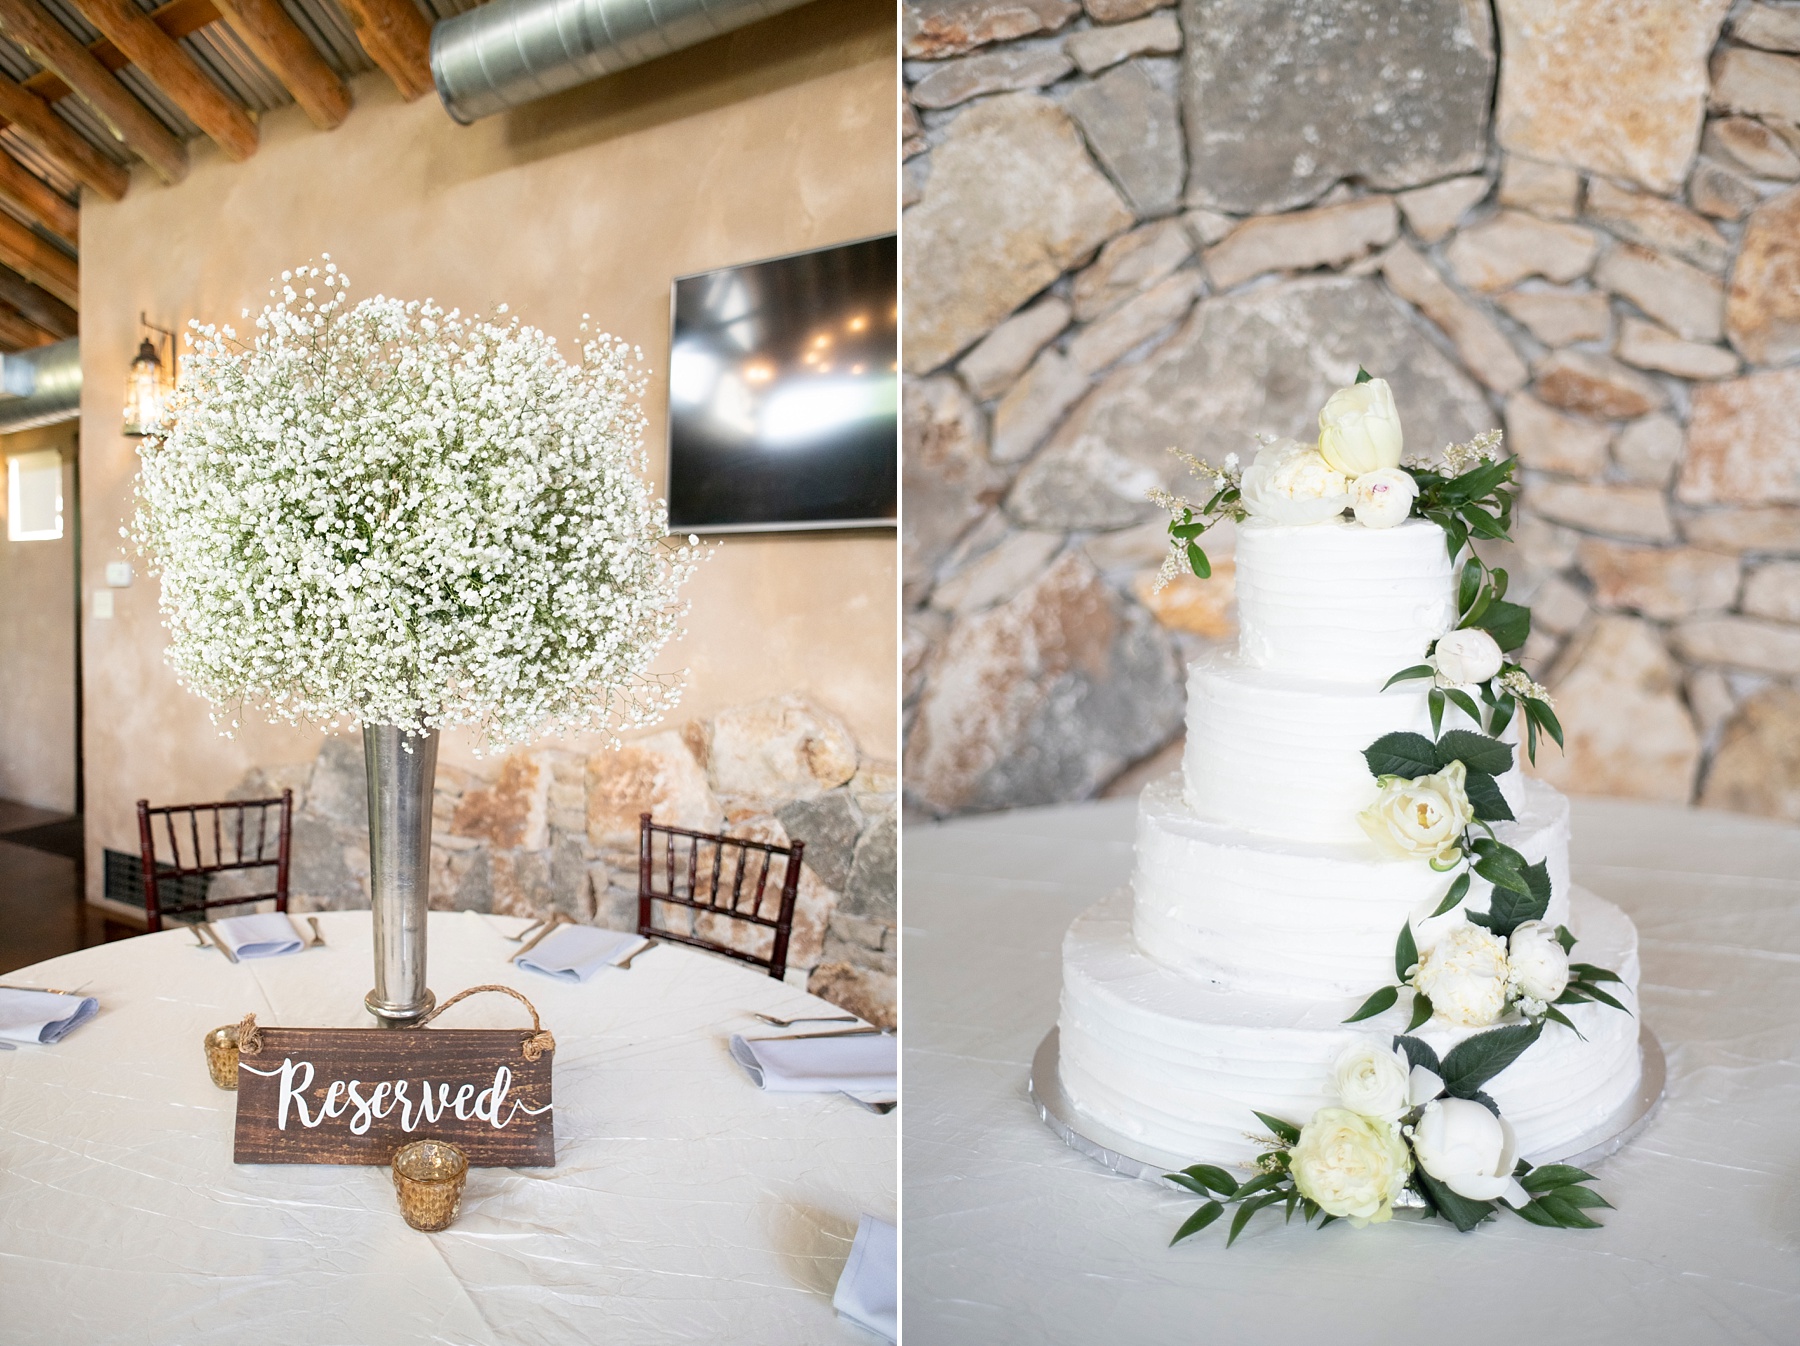 baby's breath centerpieces and wedding cake photographed by Randi Michelle